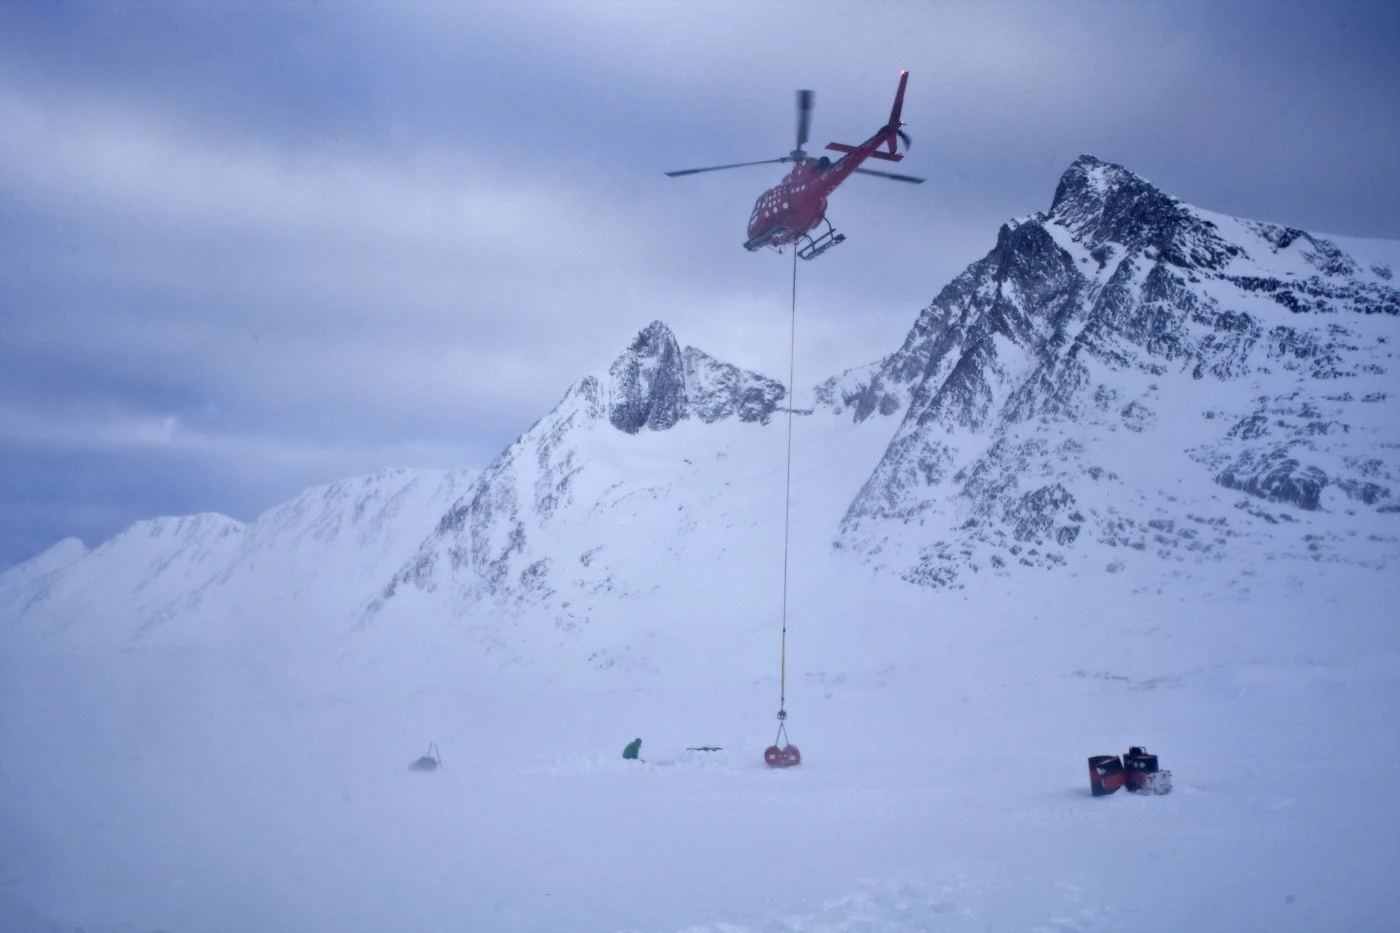 Fuel barrels were slung with a longline, shown here in March 2015, and deposited at strategic points so that the helicopter could reach polar bears in Southeast Greenland. The fieldwork required a four-hour daily helicopter commute from a Greenlandic coastal community or other bases to reach the bears’ habitat. (Fernando Ugarte/ Greenland Institute of Natural Resources)